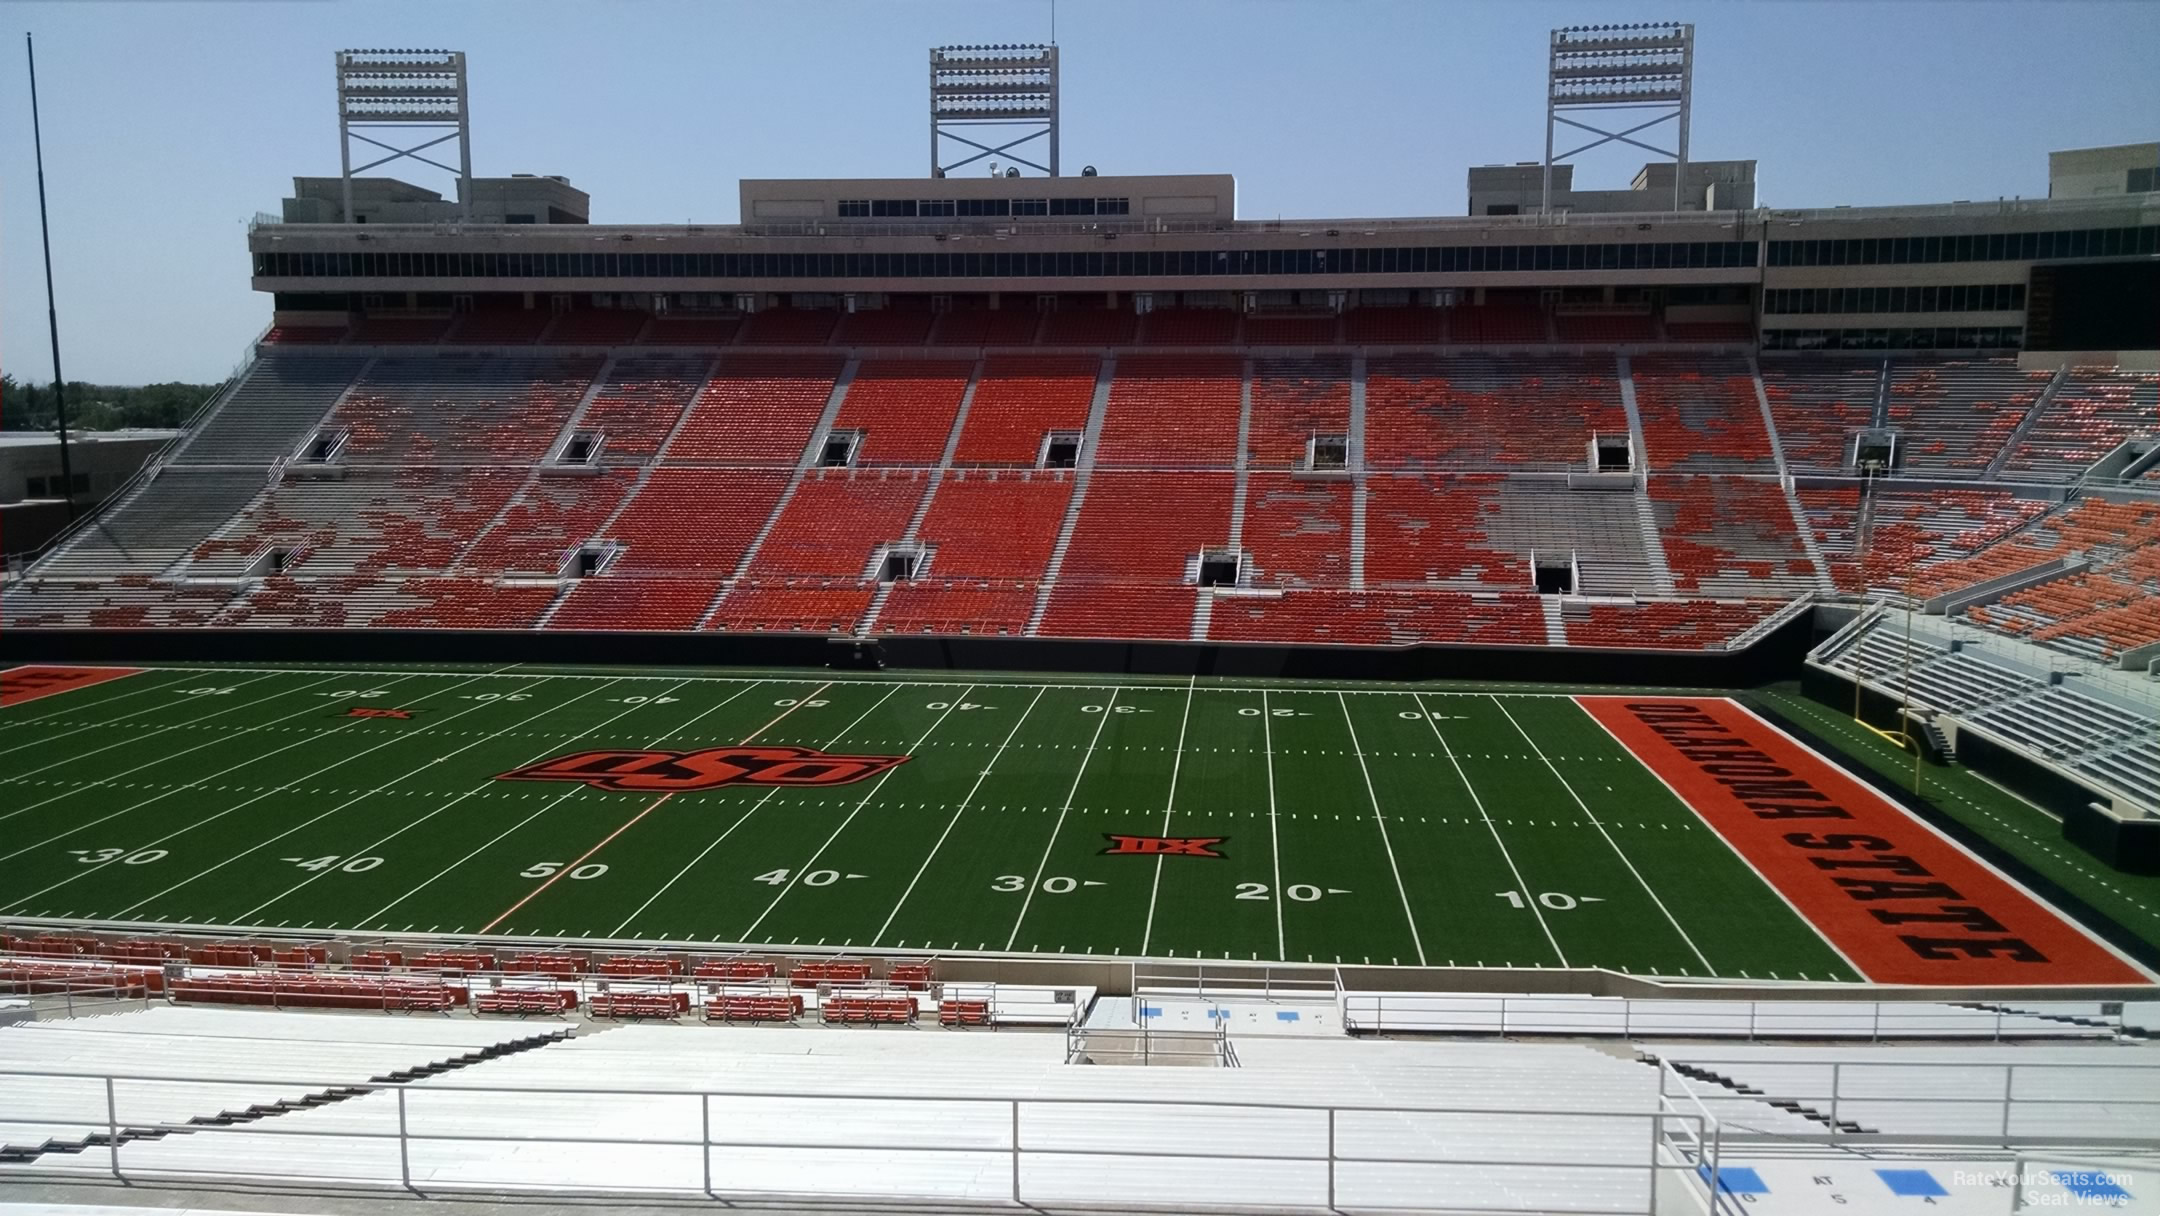 section 330, row 19 seat view  - boone pickens stadium